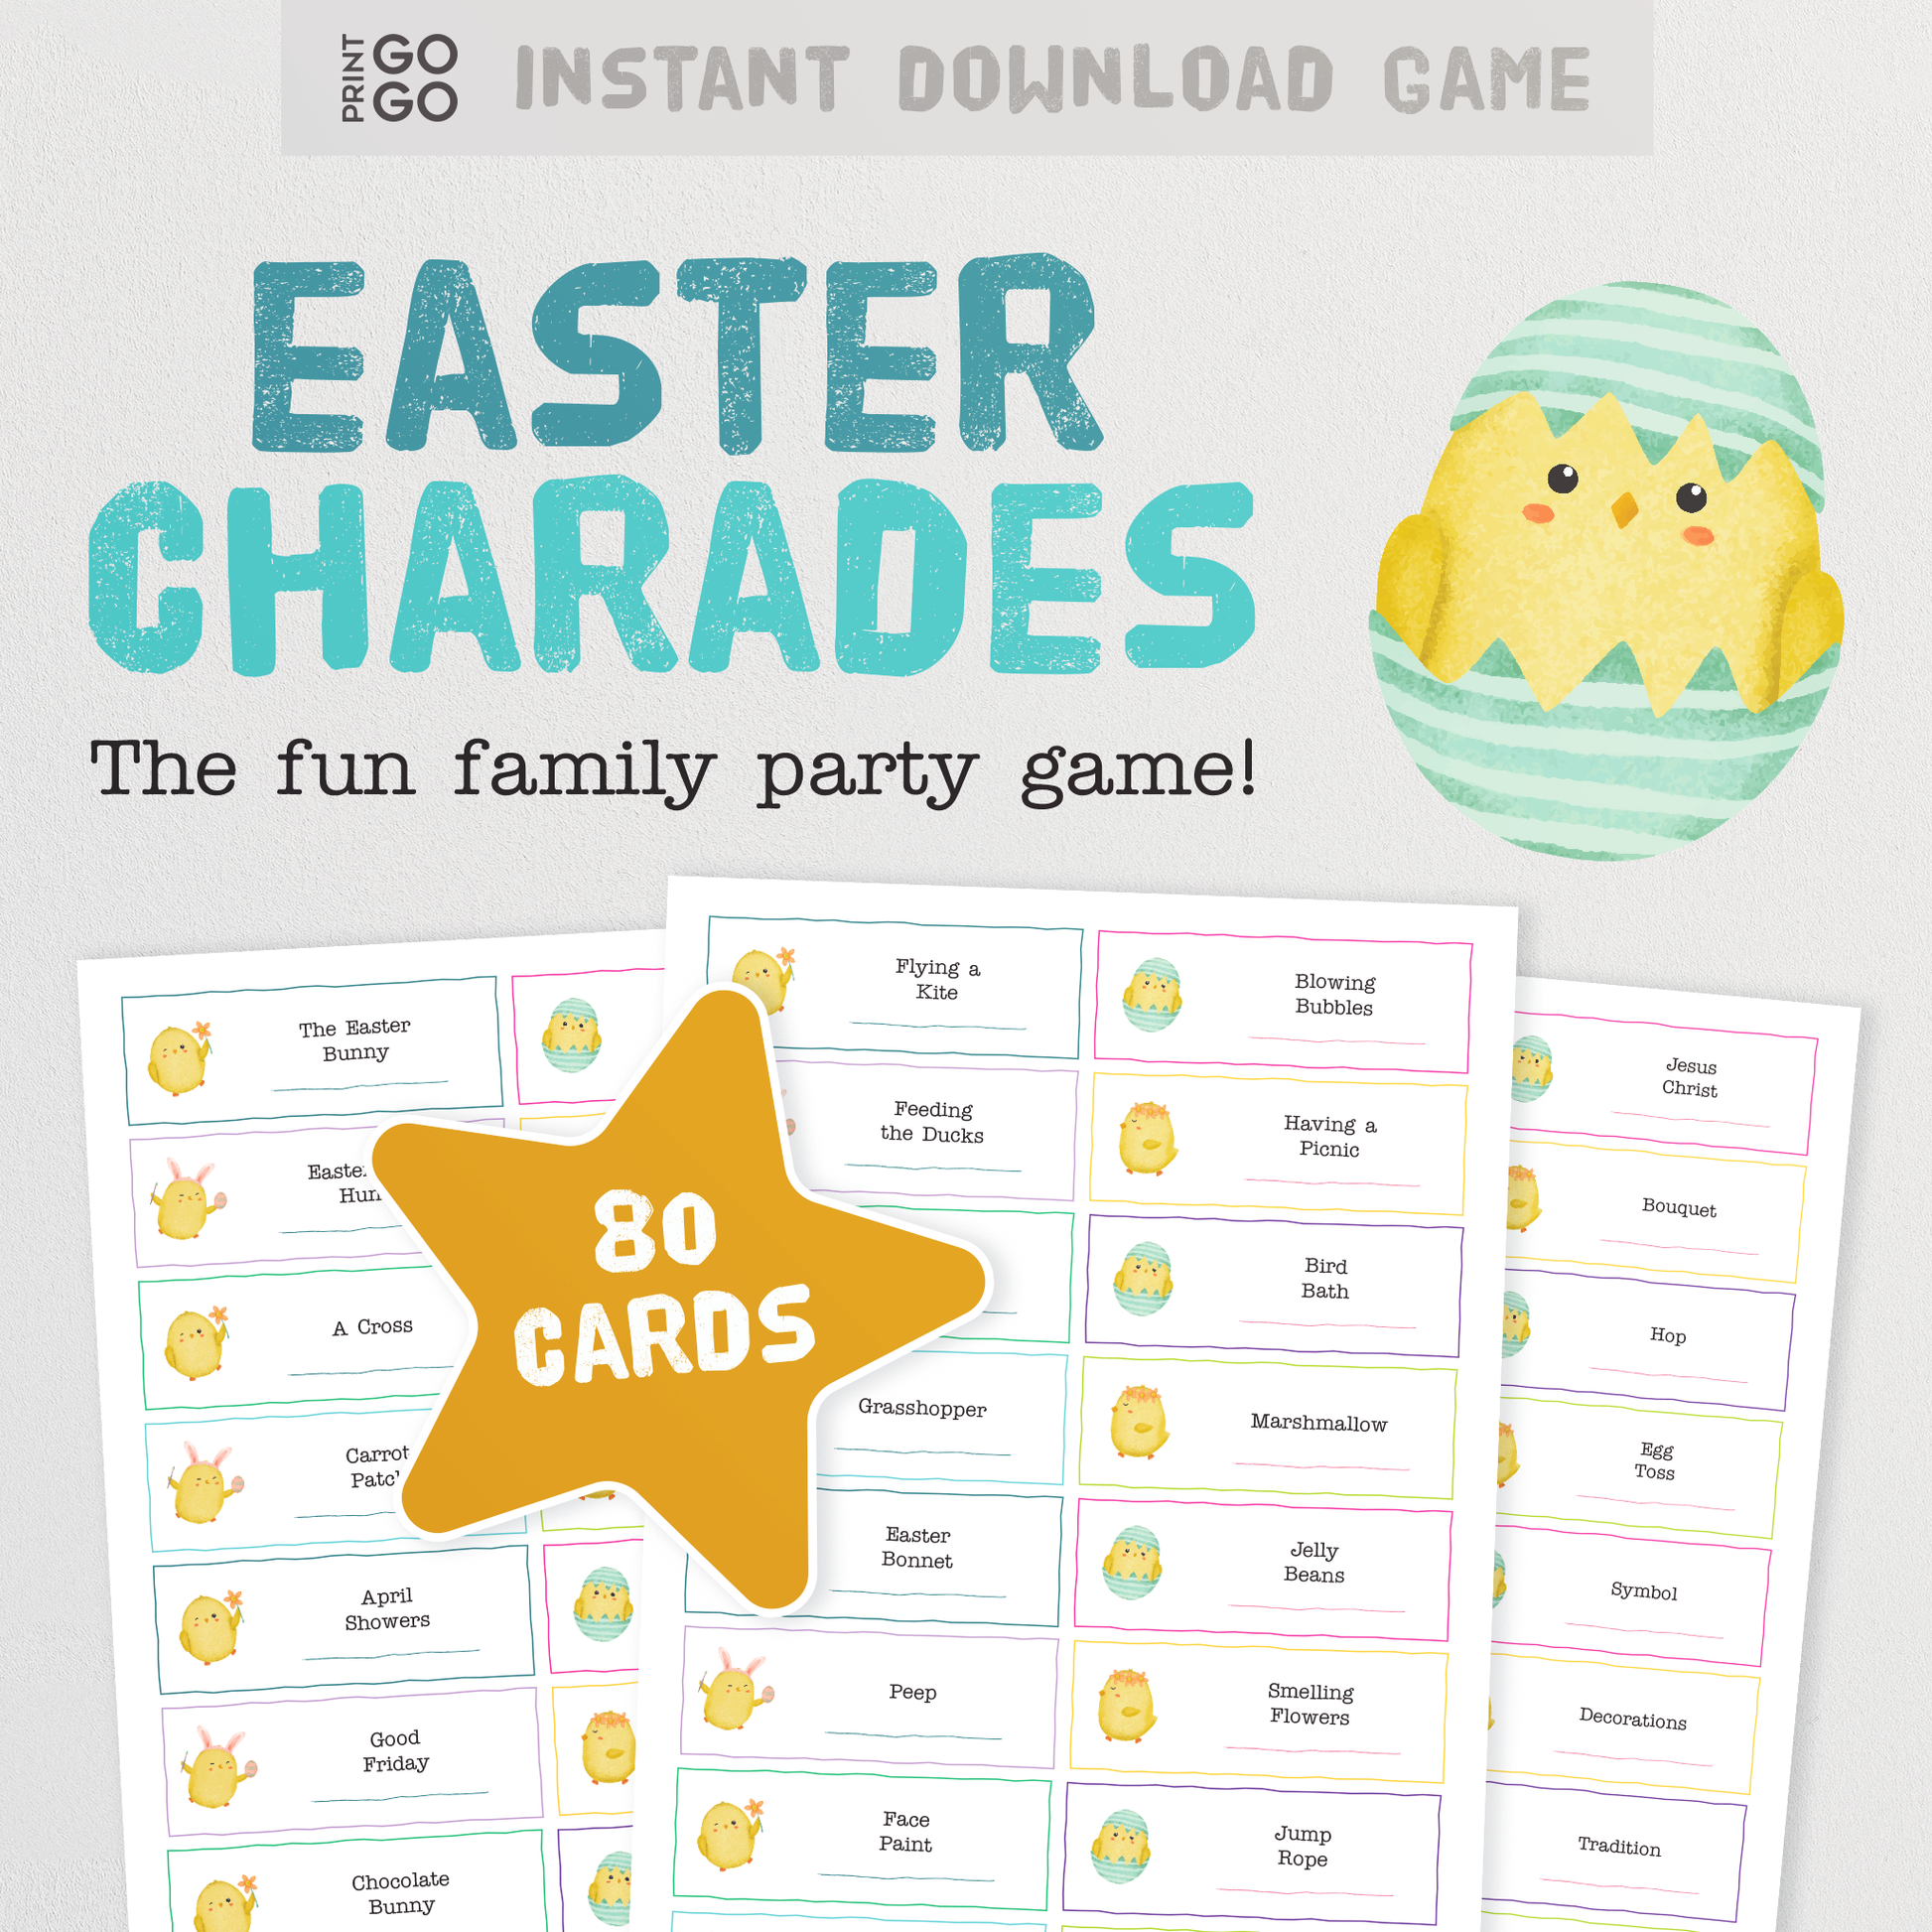 Easter Charades - The Fun Family Party Game of Acting Out